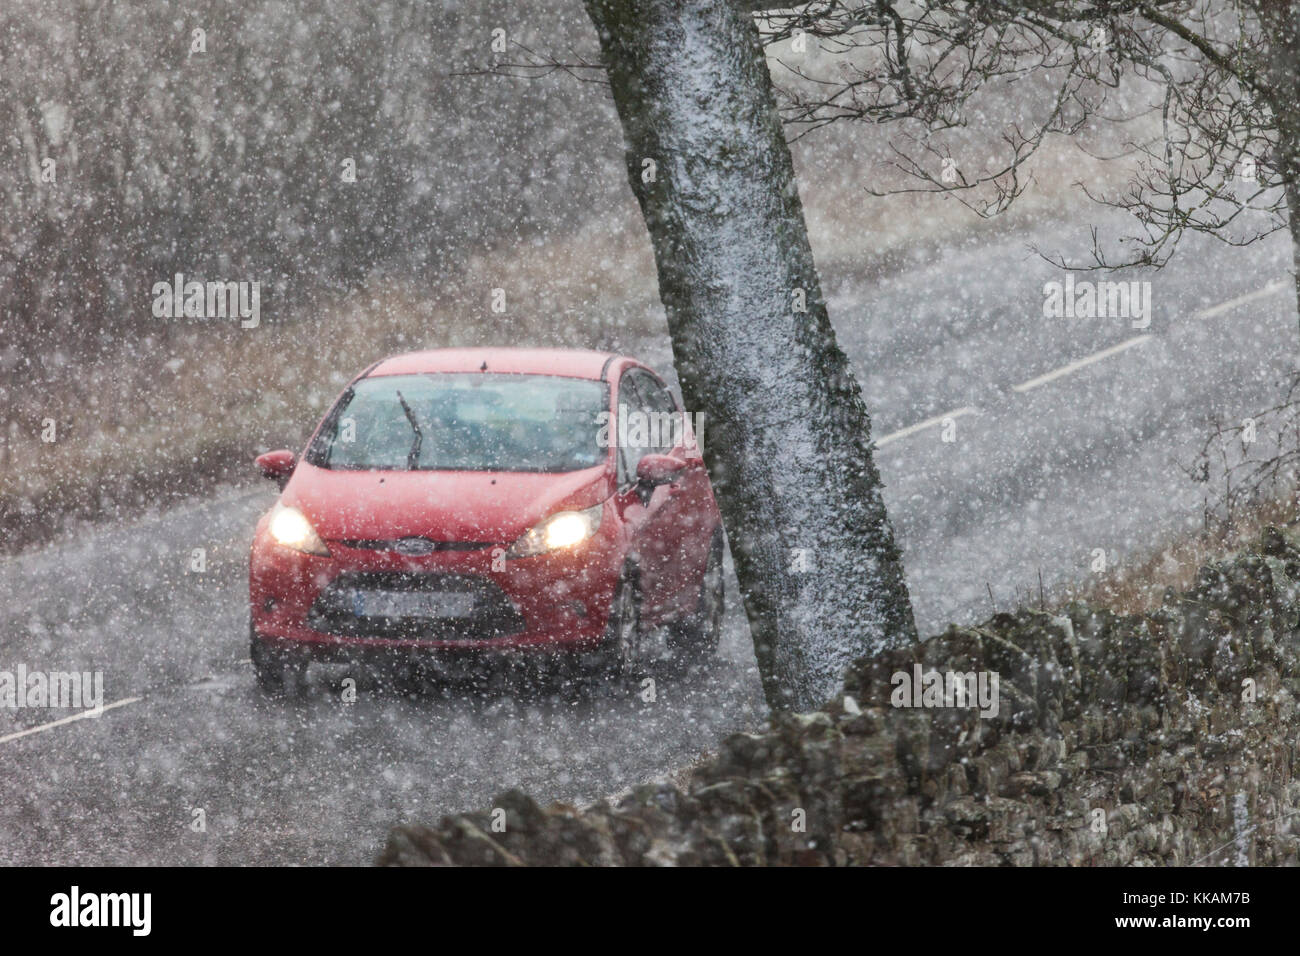 Teesdale, County Durham, UK. Thursday 30th November 2017. UK Weather.  Heavy snow showers are affecting driving conditions in North East England. Credit: David Forster/Alamy Live News Stock Photo